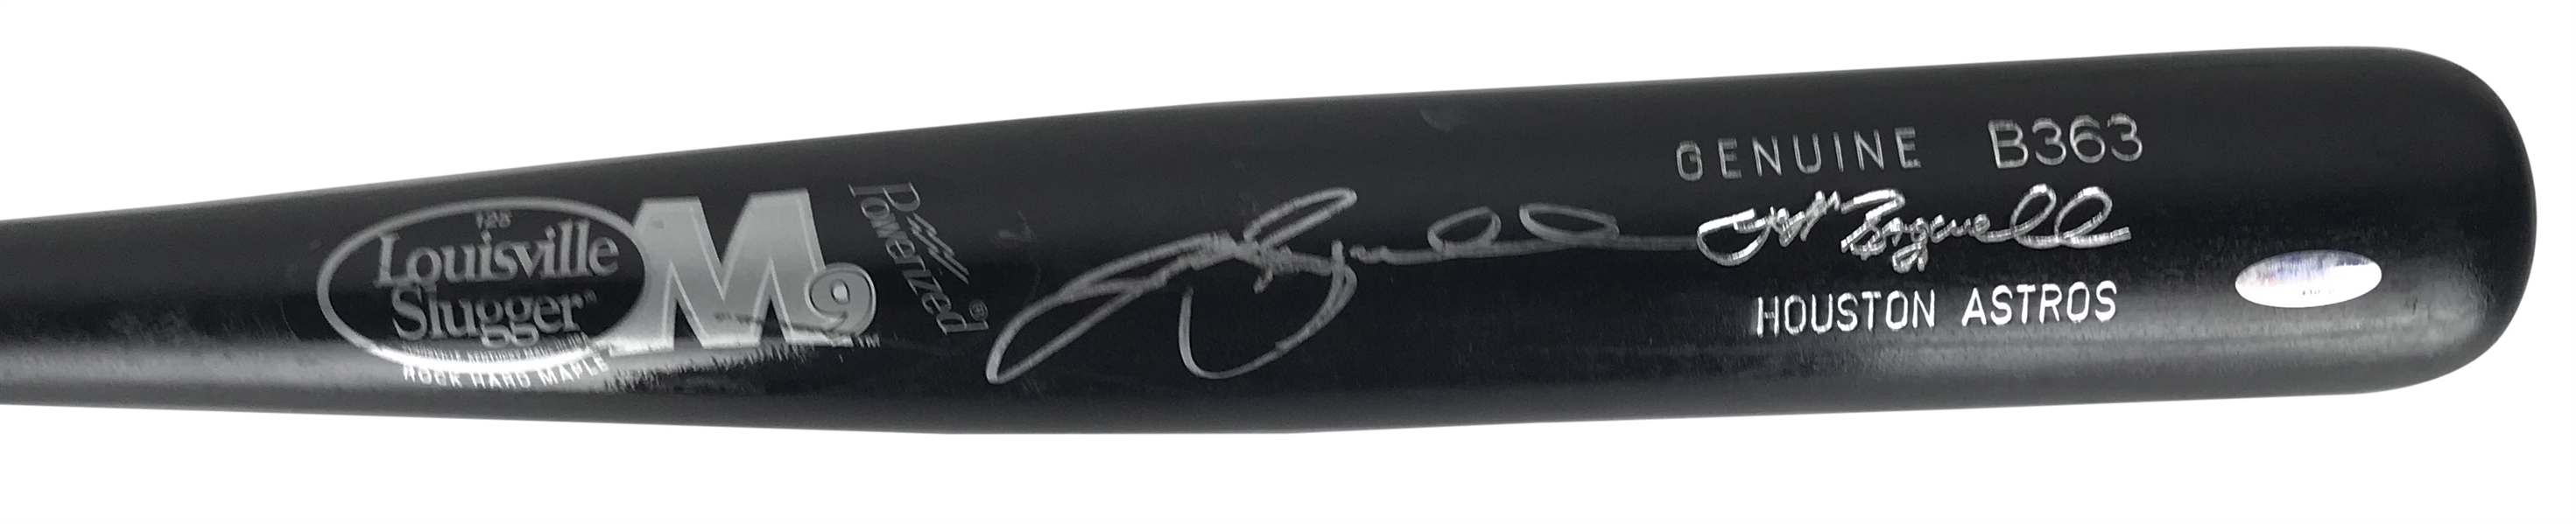 Jeff Bagwell Signed Game-Issued Baseball Bat (Tristar)